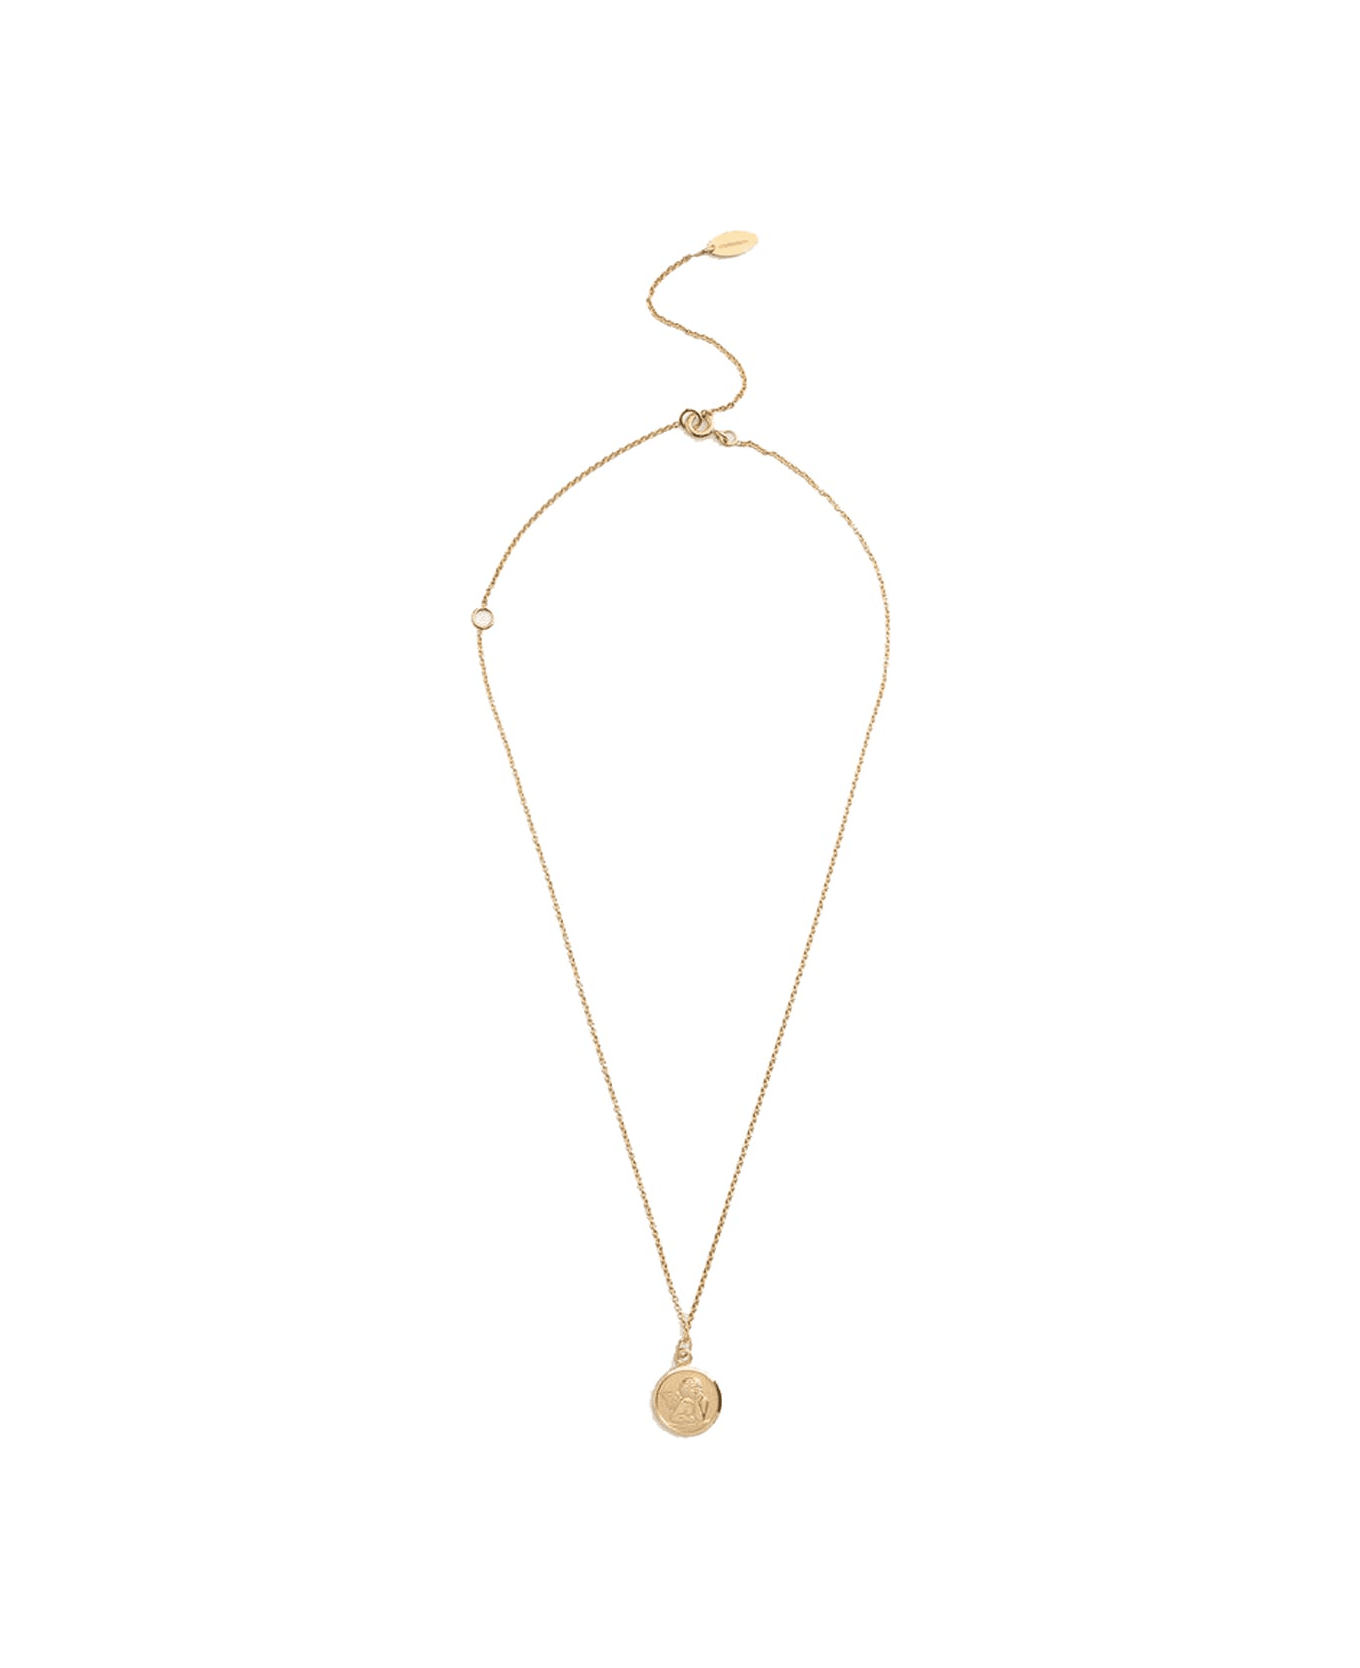 Dolce & Gabbana Necklace With Angel Medallion - Gold